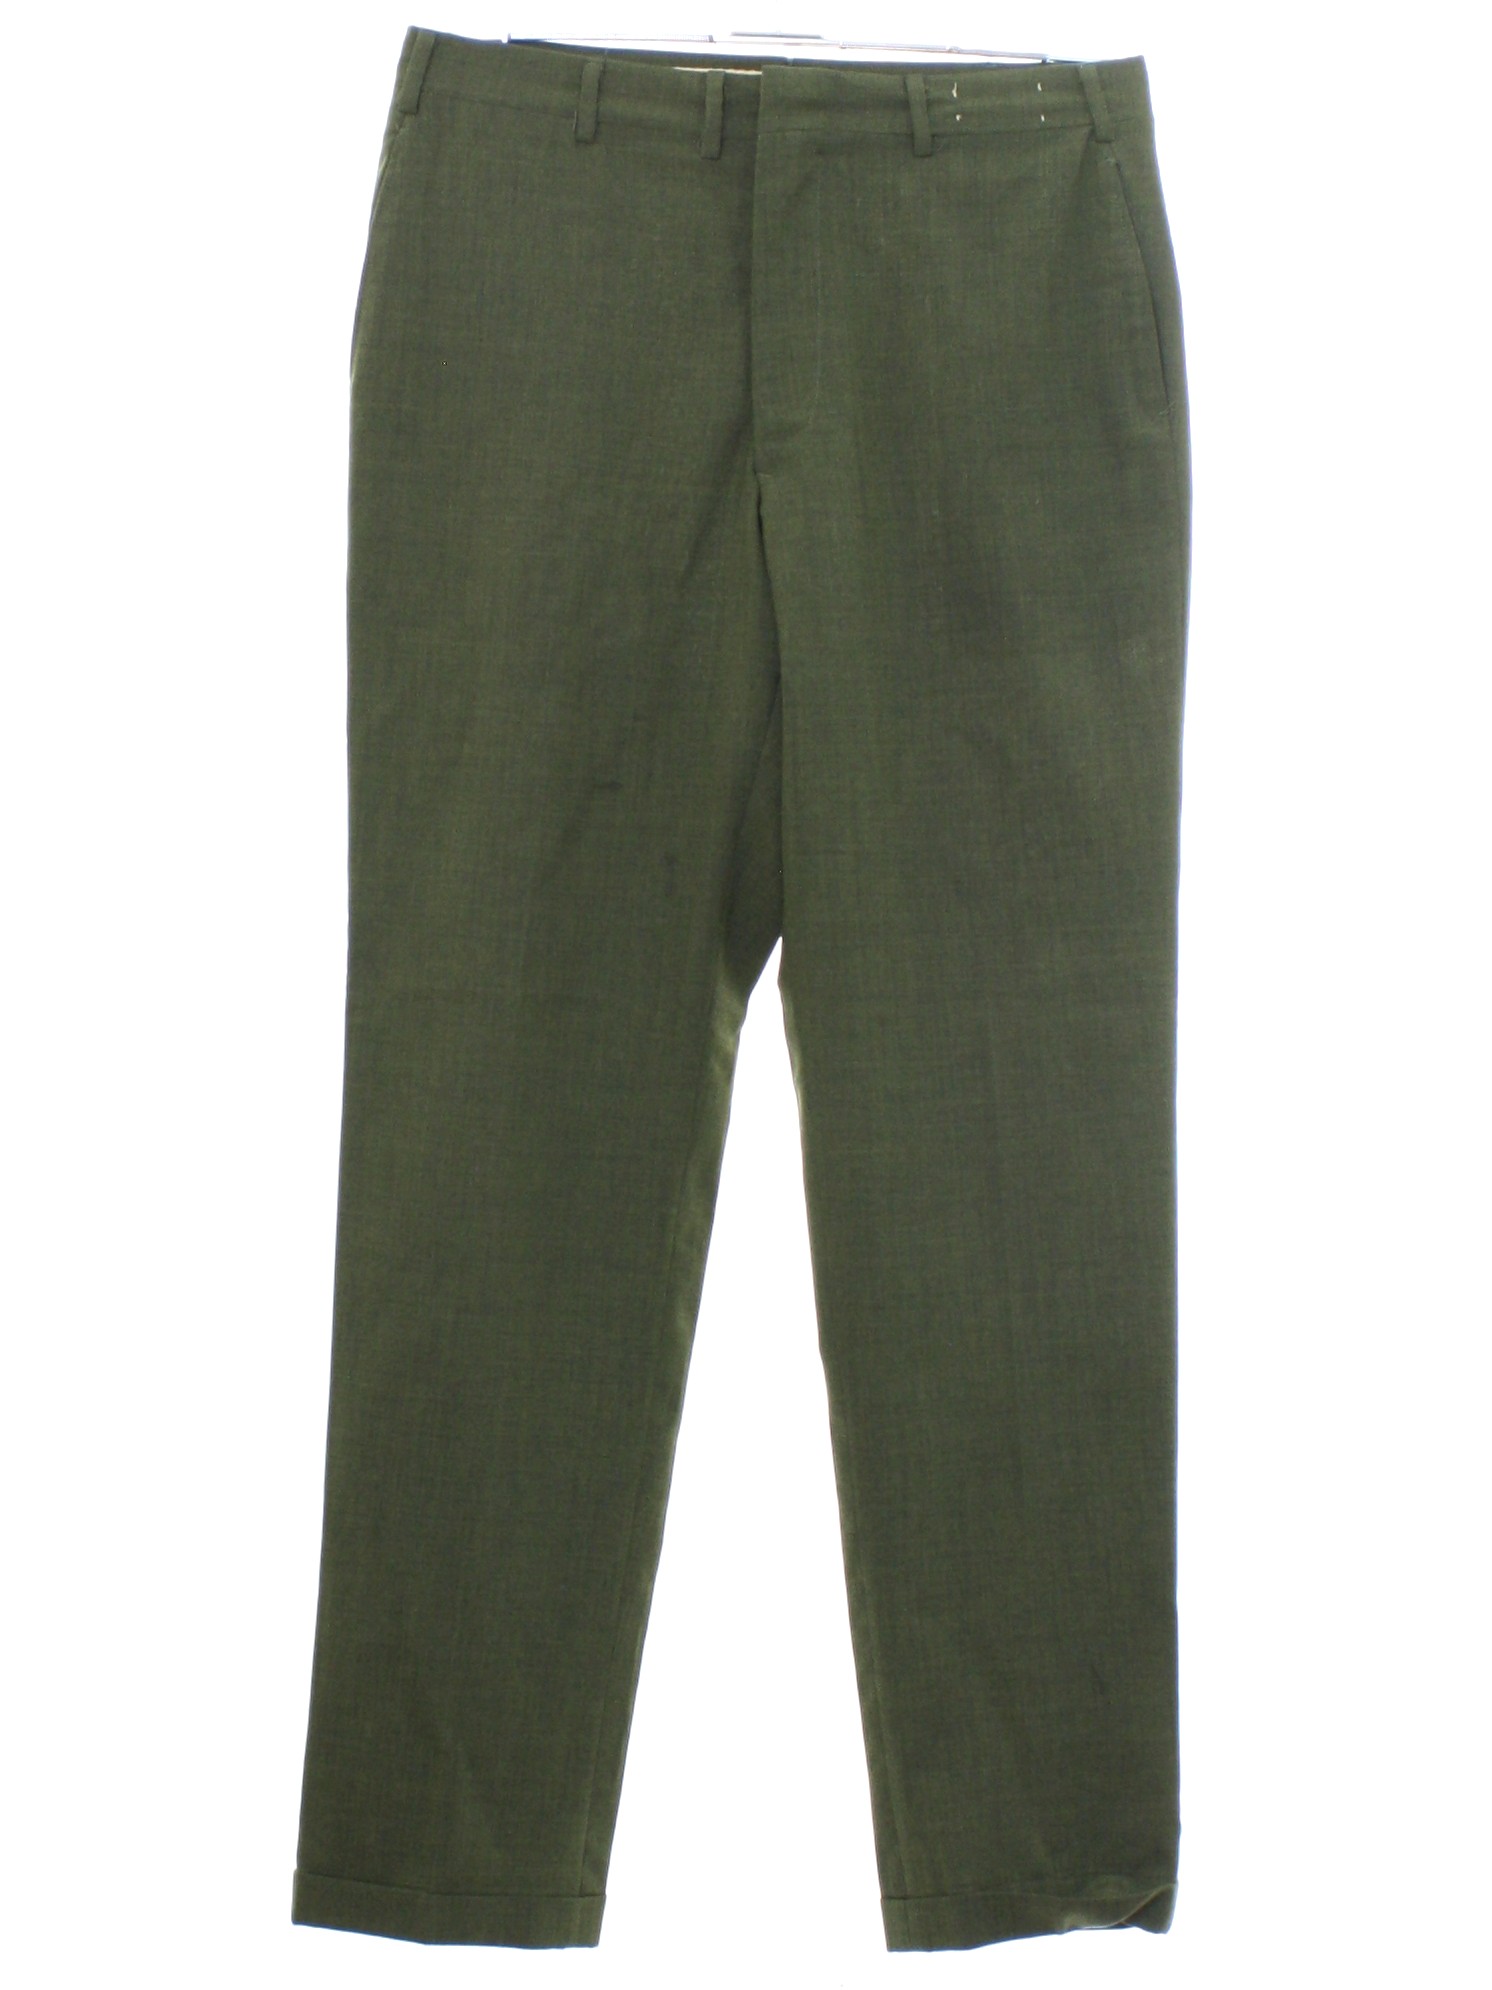 Vintage 60s Pants: 60s -Pendleton- Mens army green solid colored wool ...